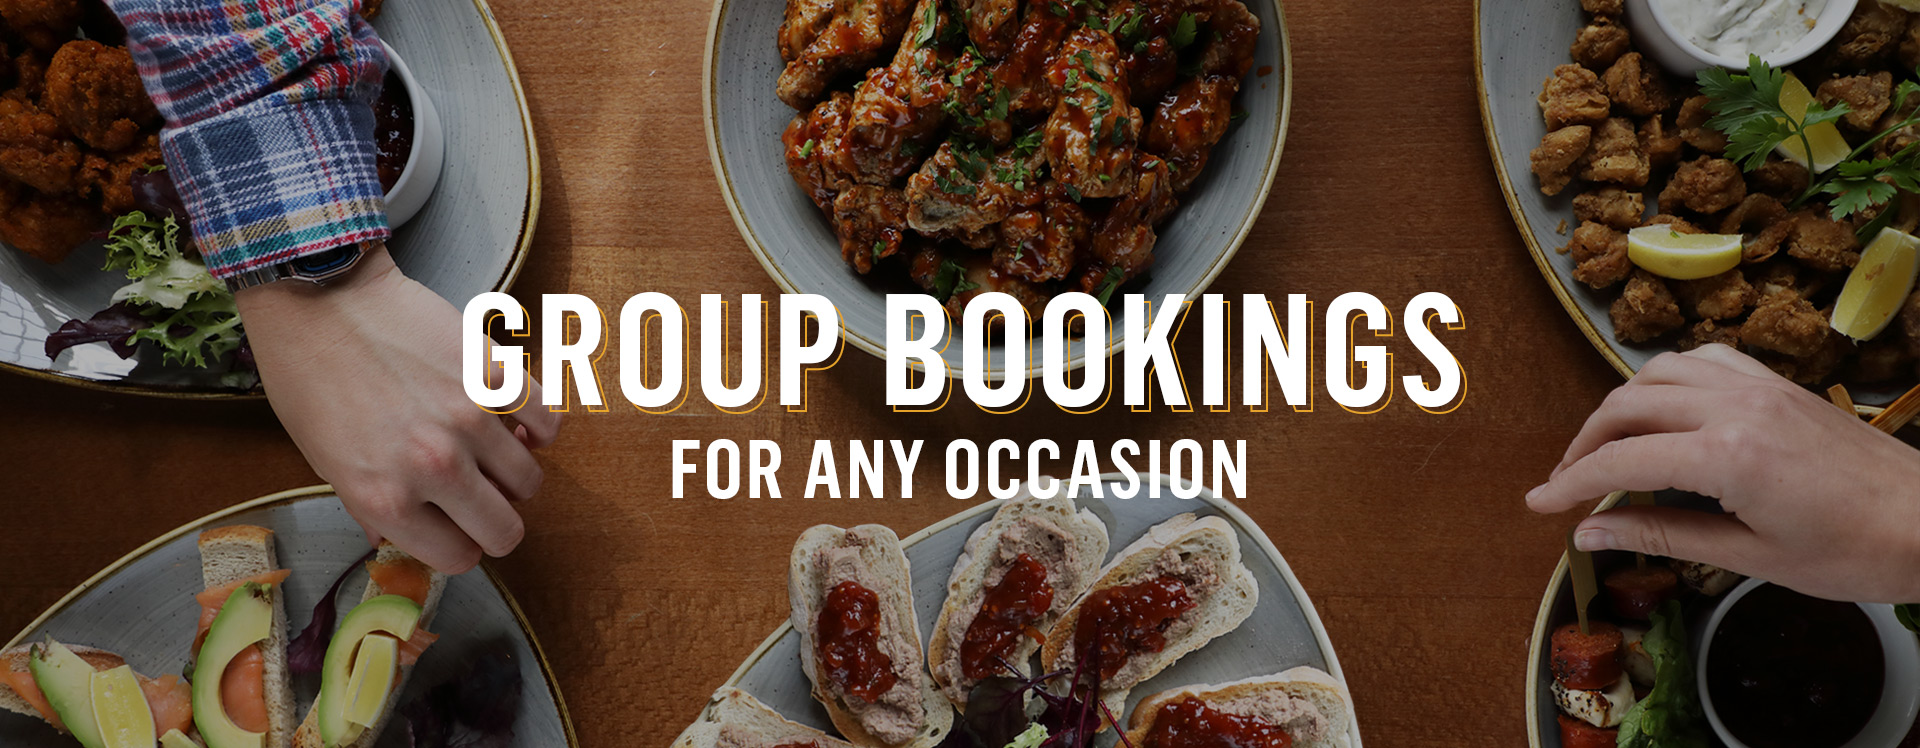 Group Bookings at The Shakespeare